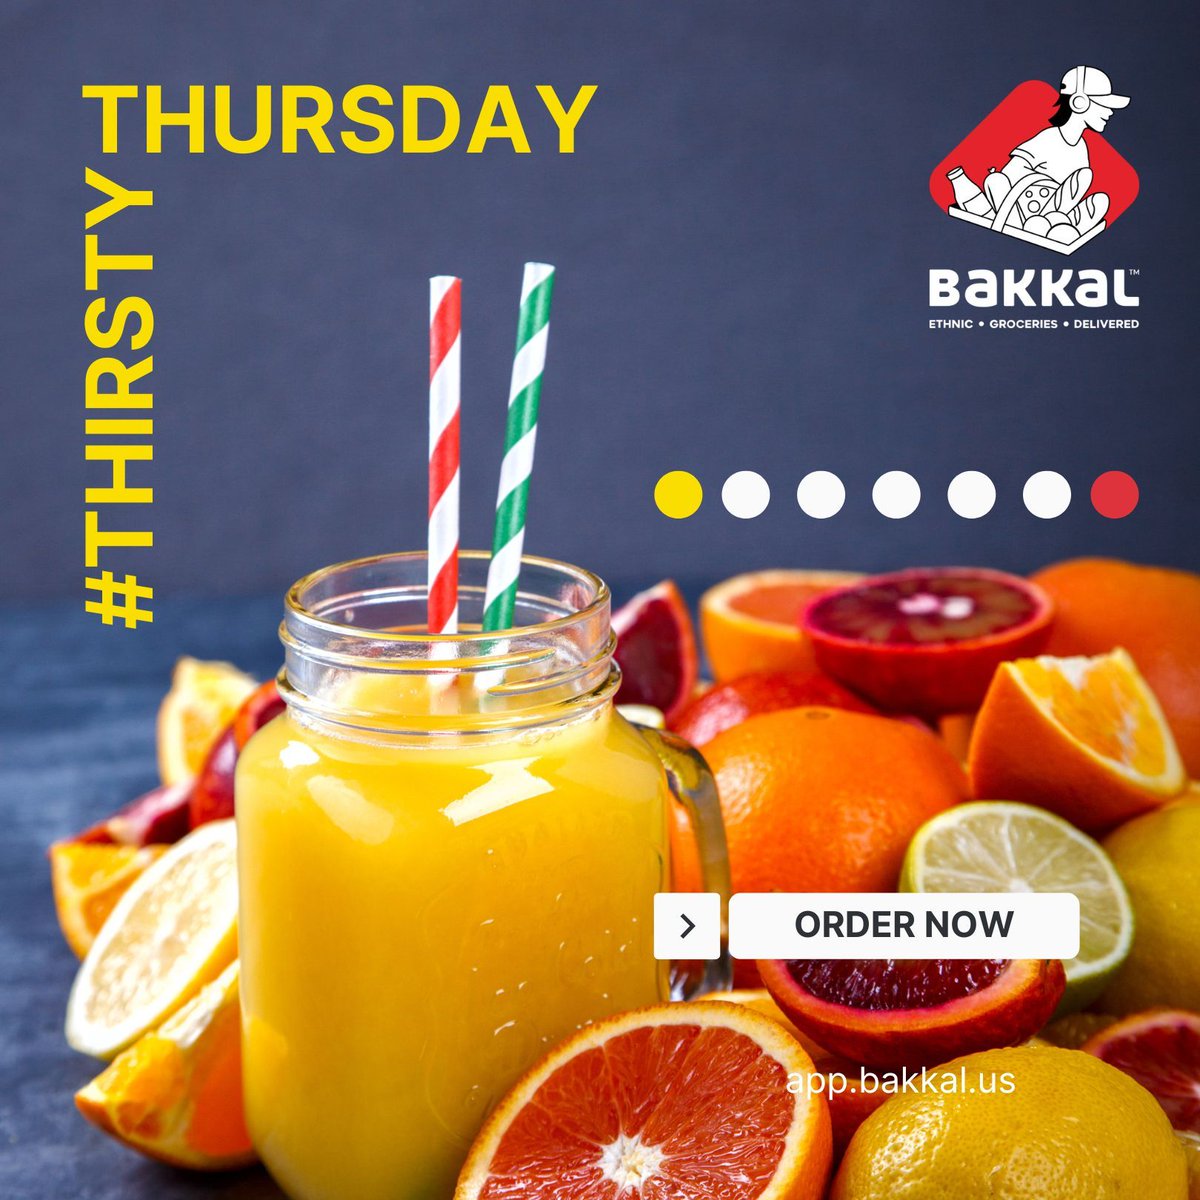 Thirsty Thursday calls for refreshing beverages! 🥤🍹 Discover Bakkal's wide range of drinks. Order now and quench your thirst in style! #ThirstyThursday #DrinkUp #RefreshingDrinks #BeverageTime #QuenchYourThirst #ThirstQuencher #OnlineShopping #Convenience #DrinkSelection